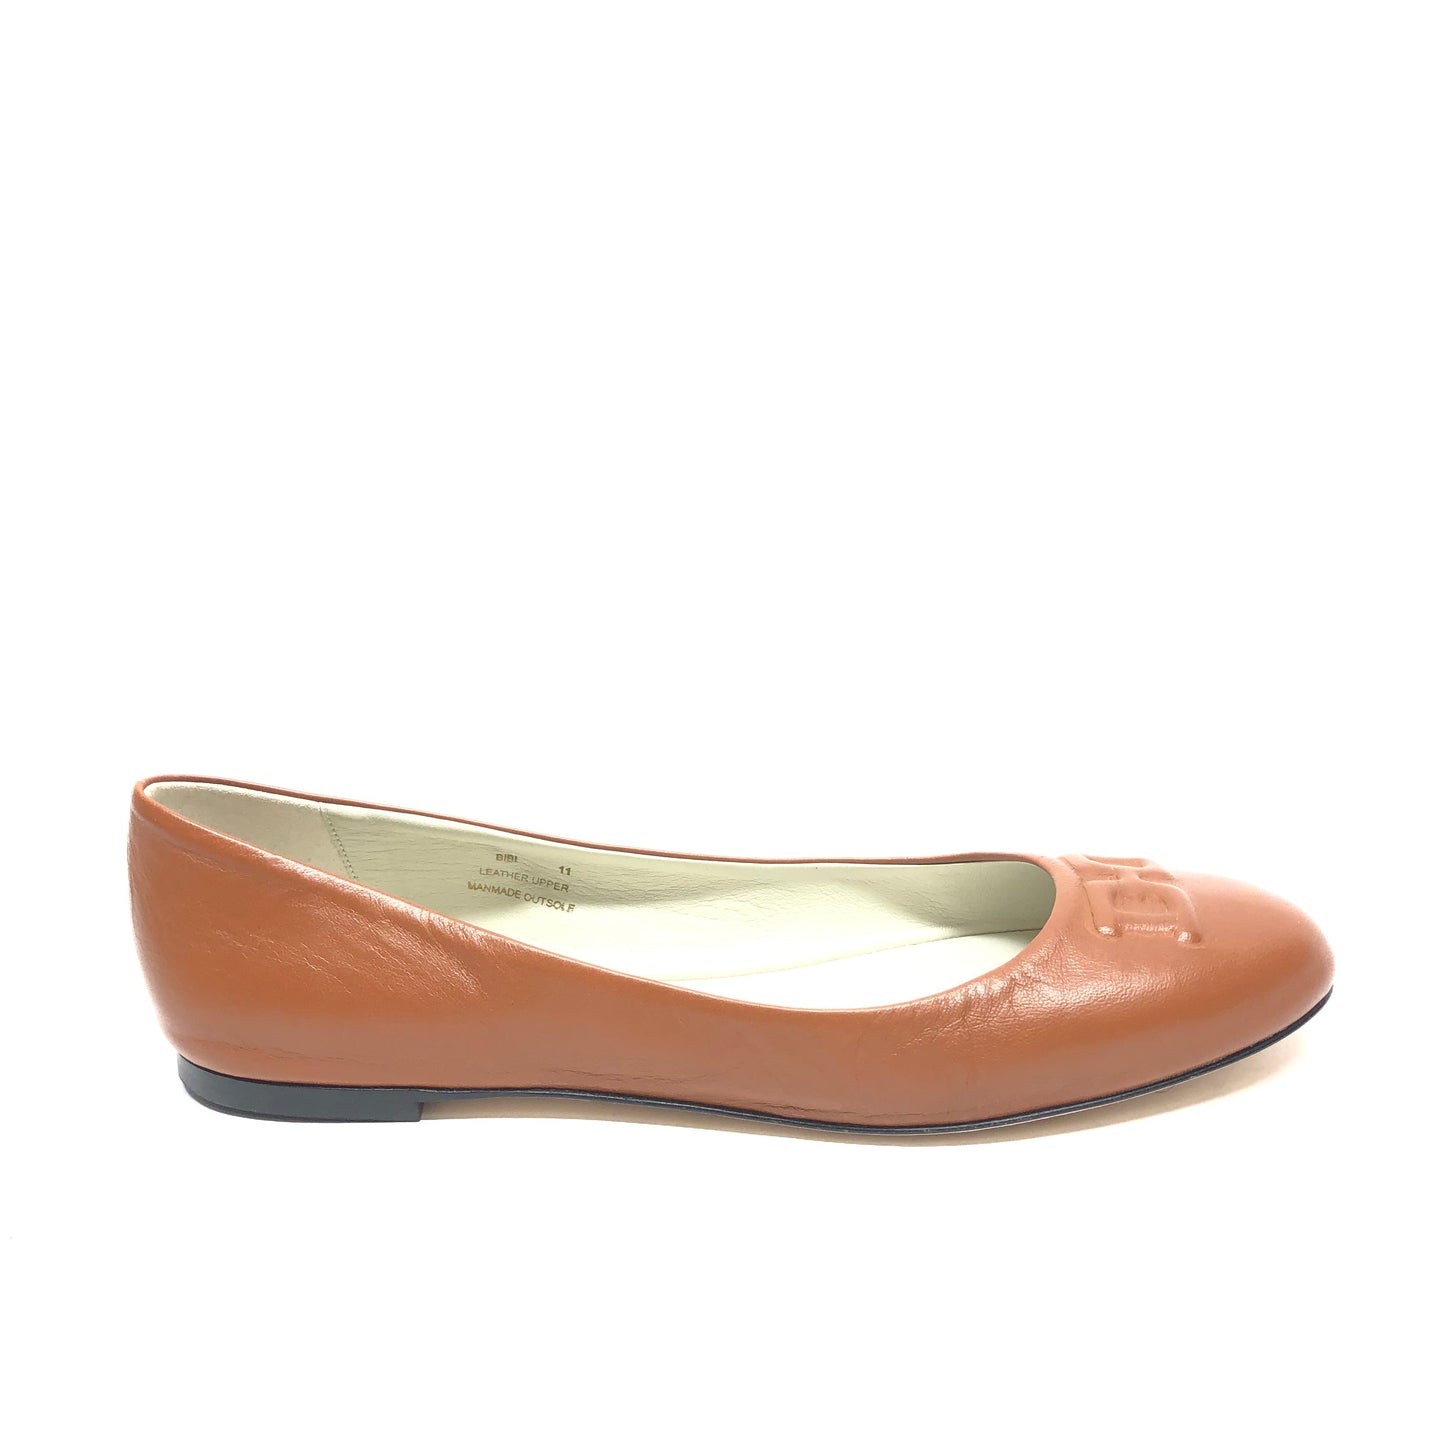 Shoes Flats By Bruno Magli Shoes  Size: 11